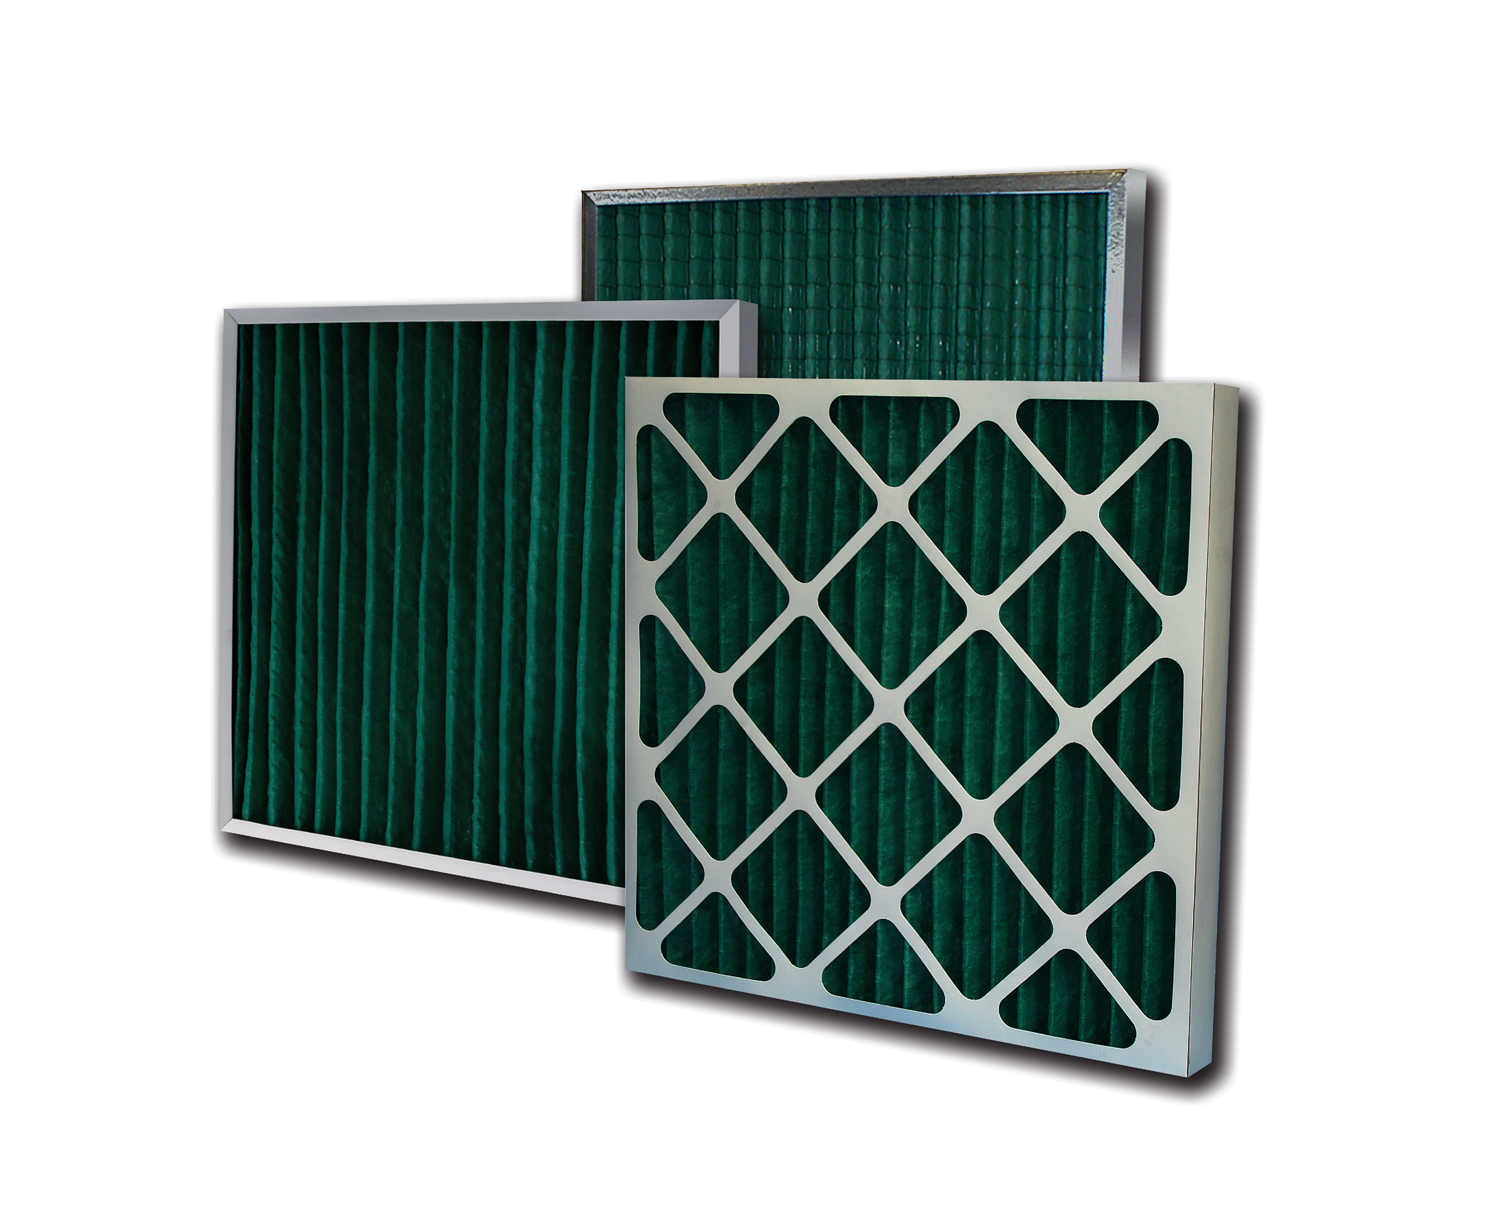 Sales of premium filters and professional filter replacement including waste treatment